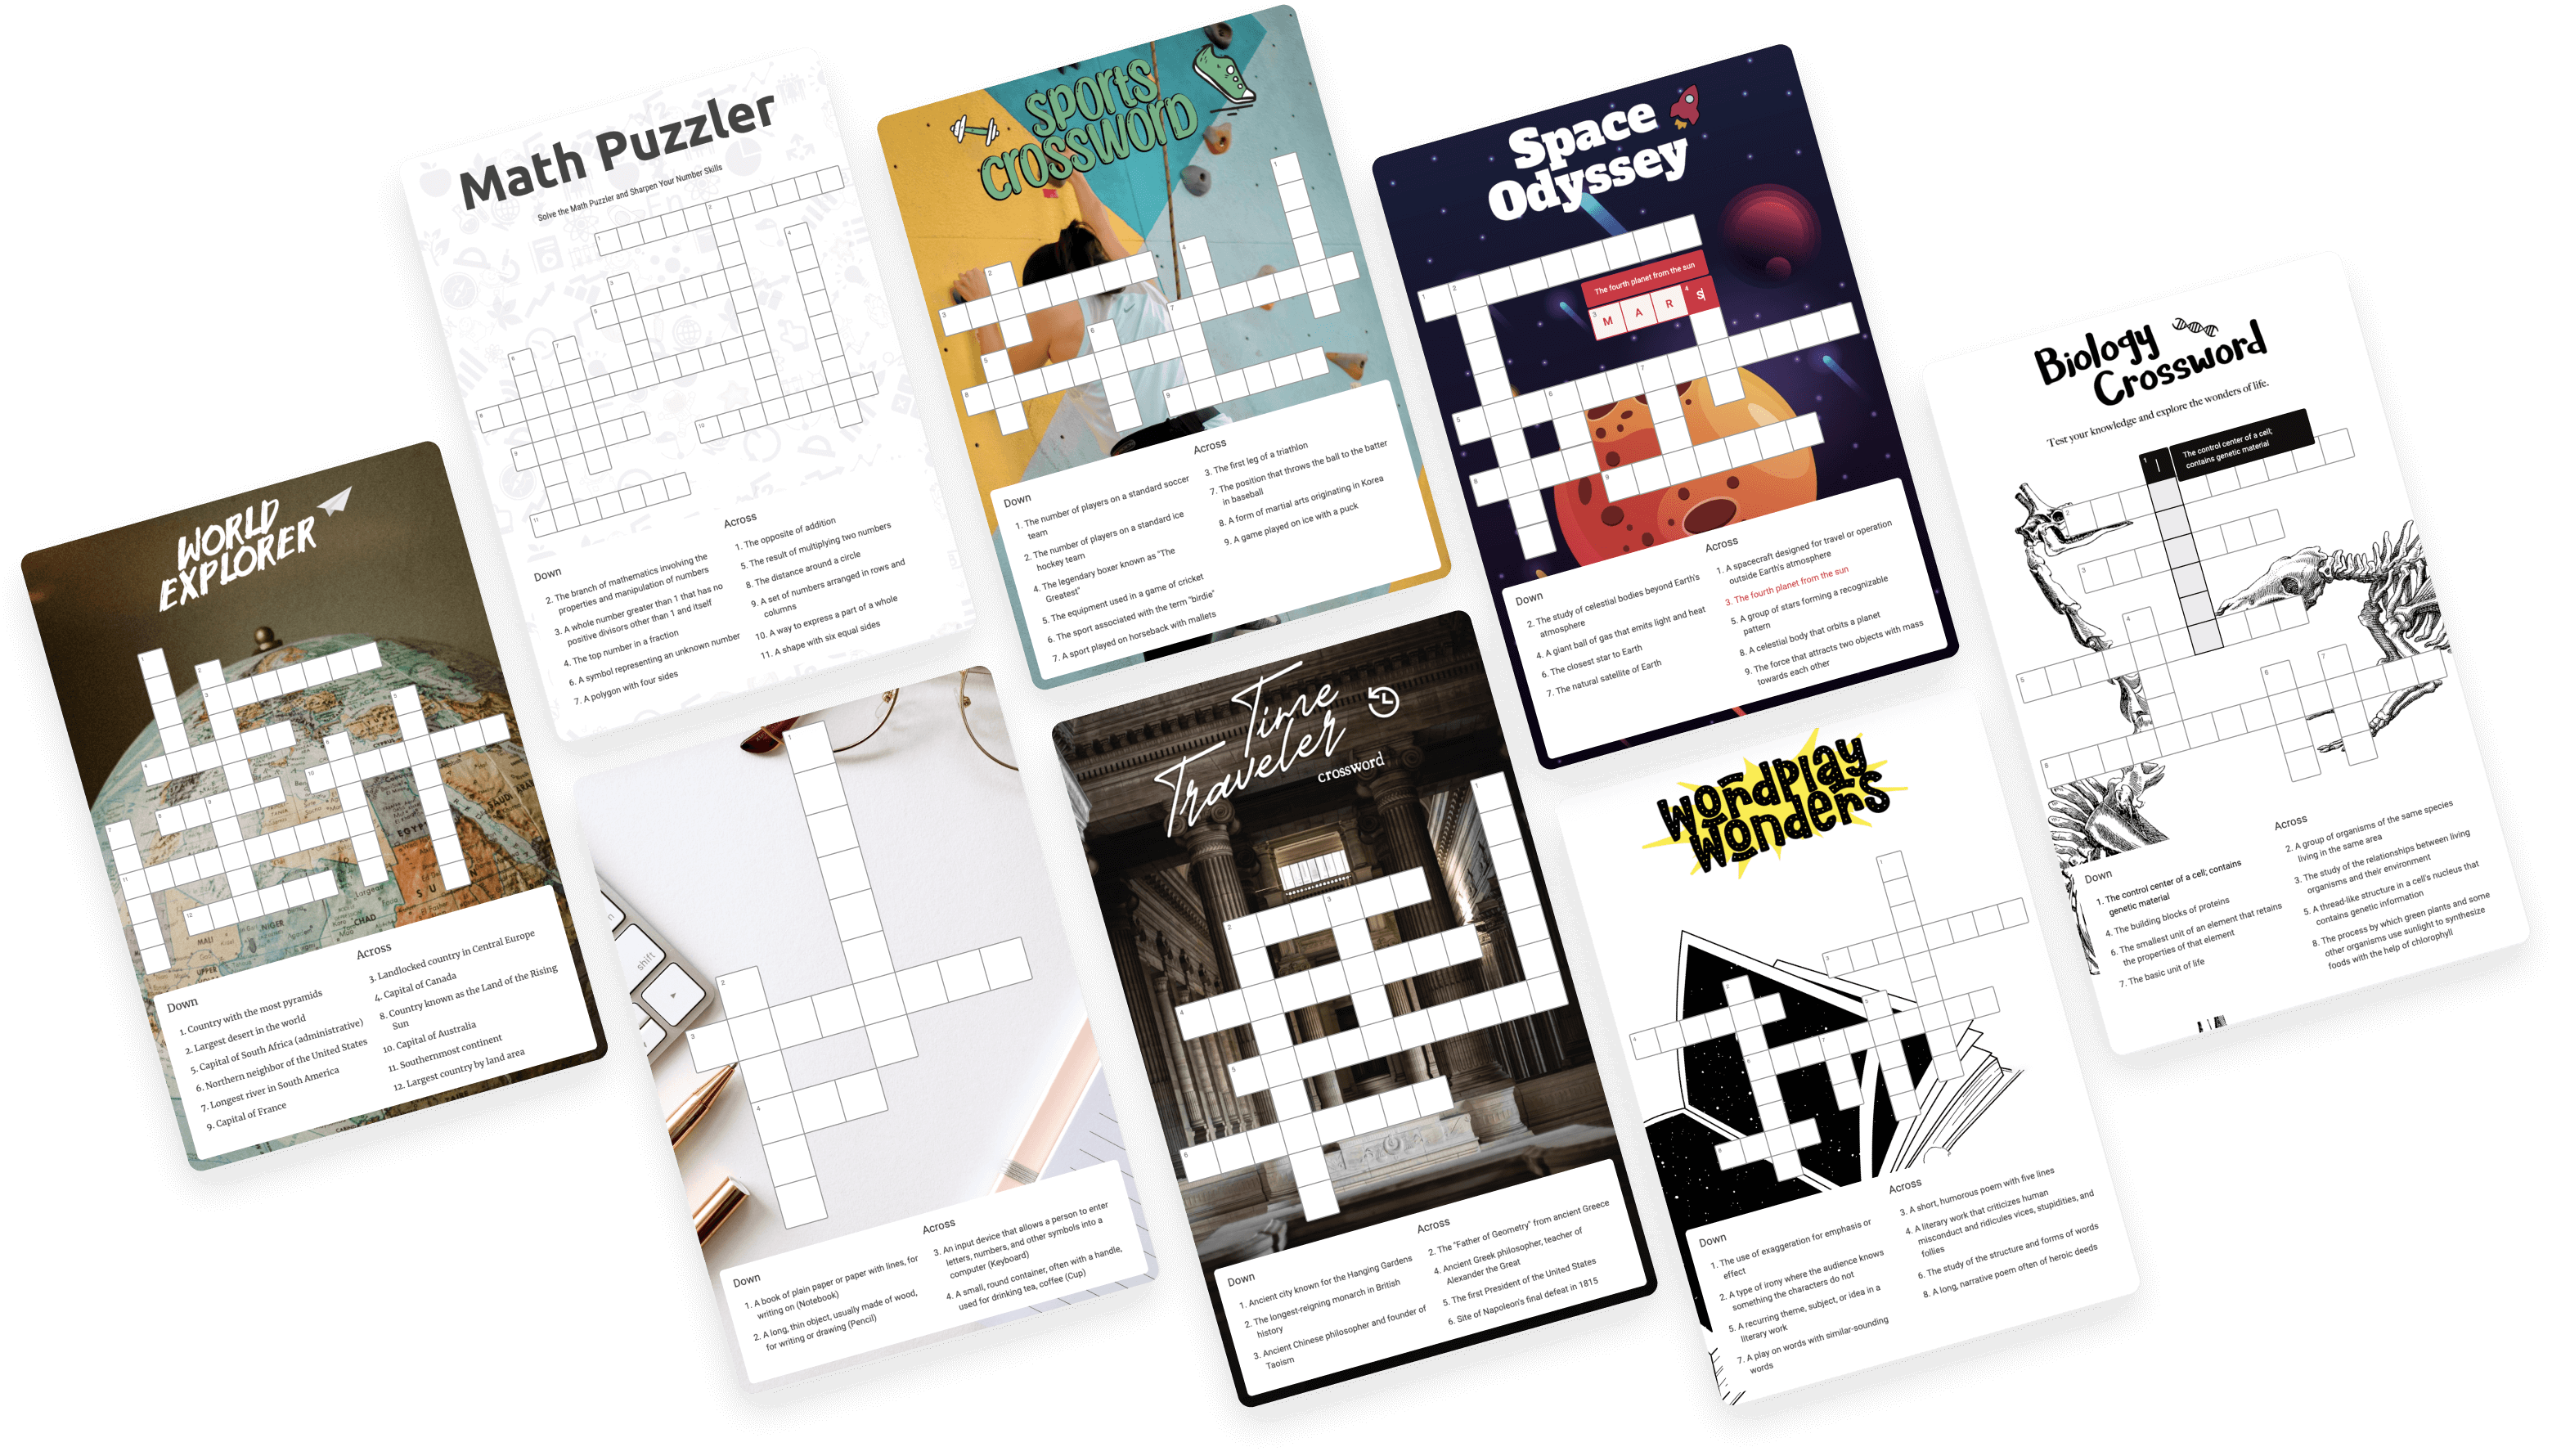 Posters with Interacty projects based on mechanics "Mots croisés"